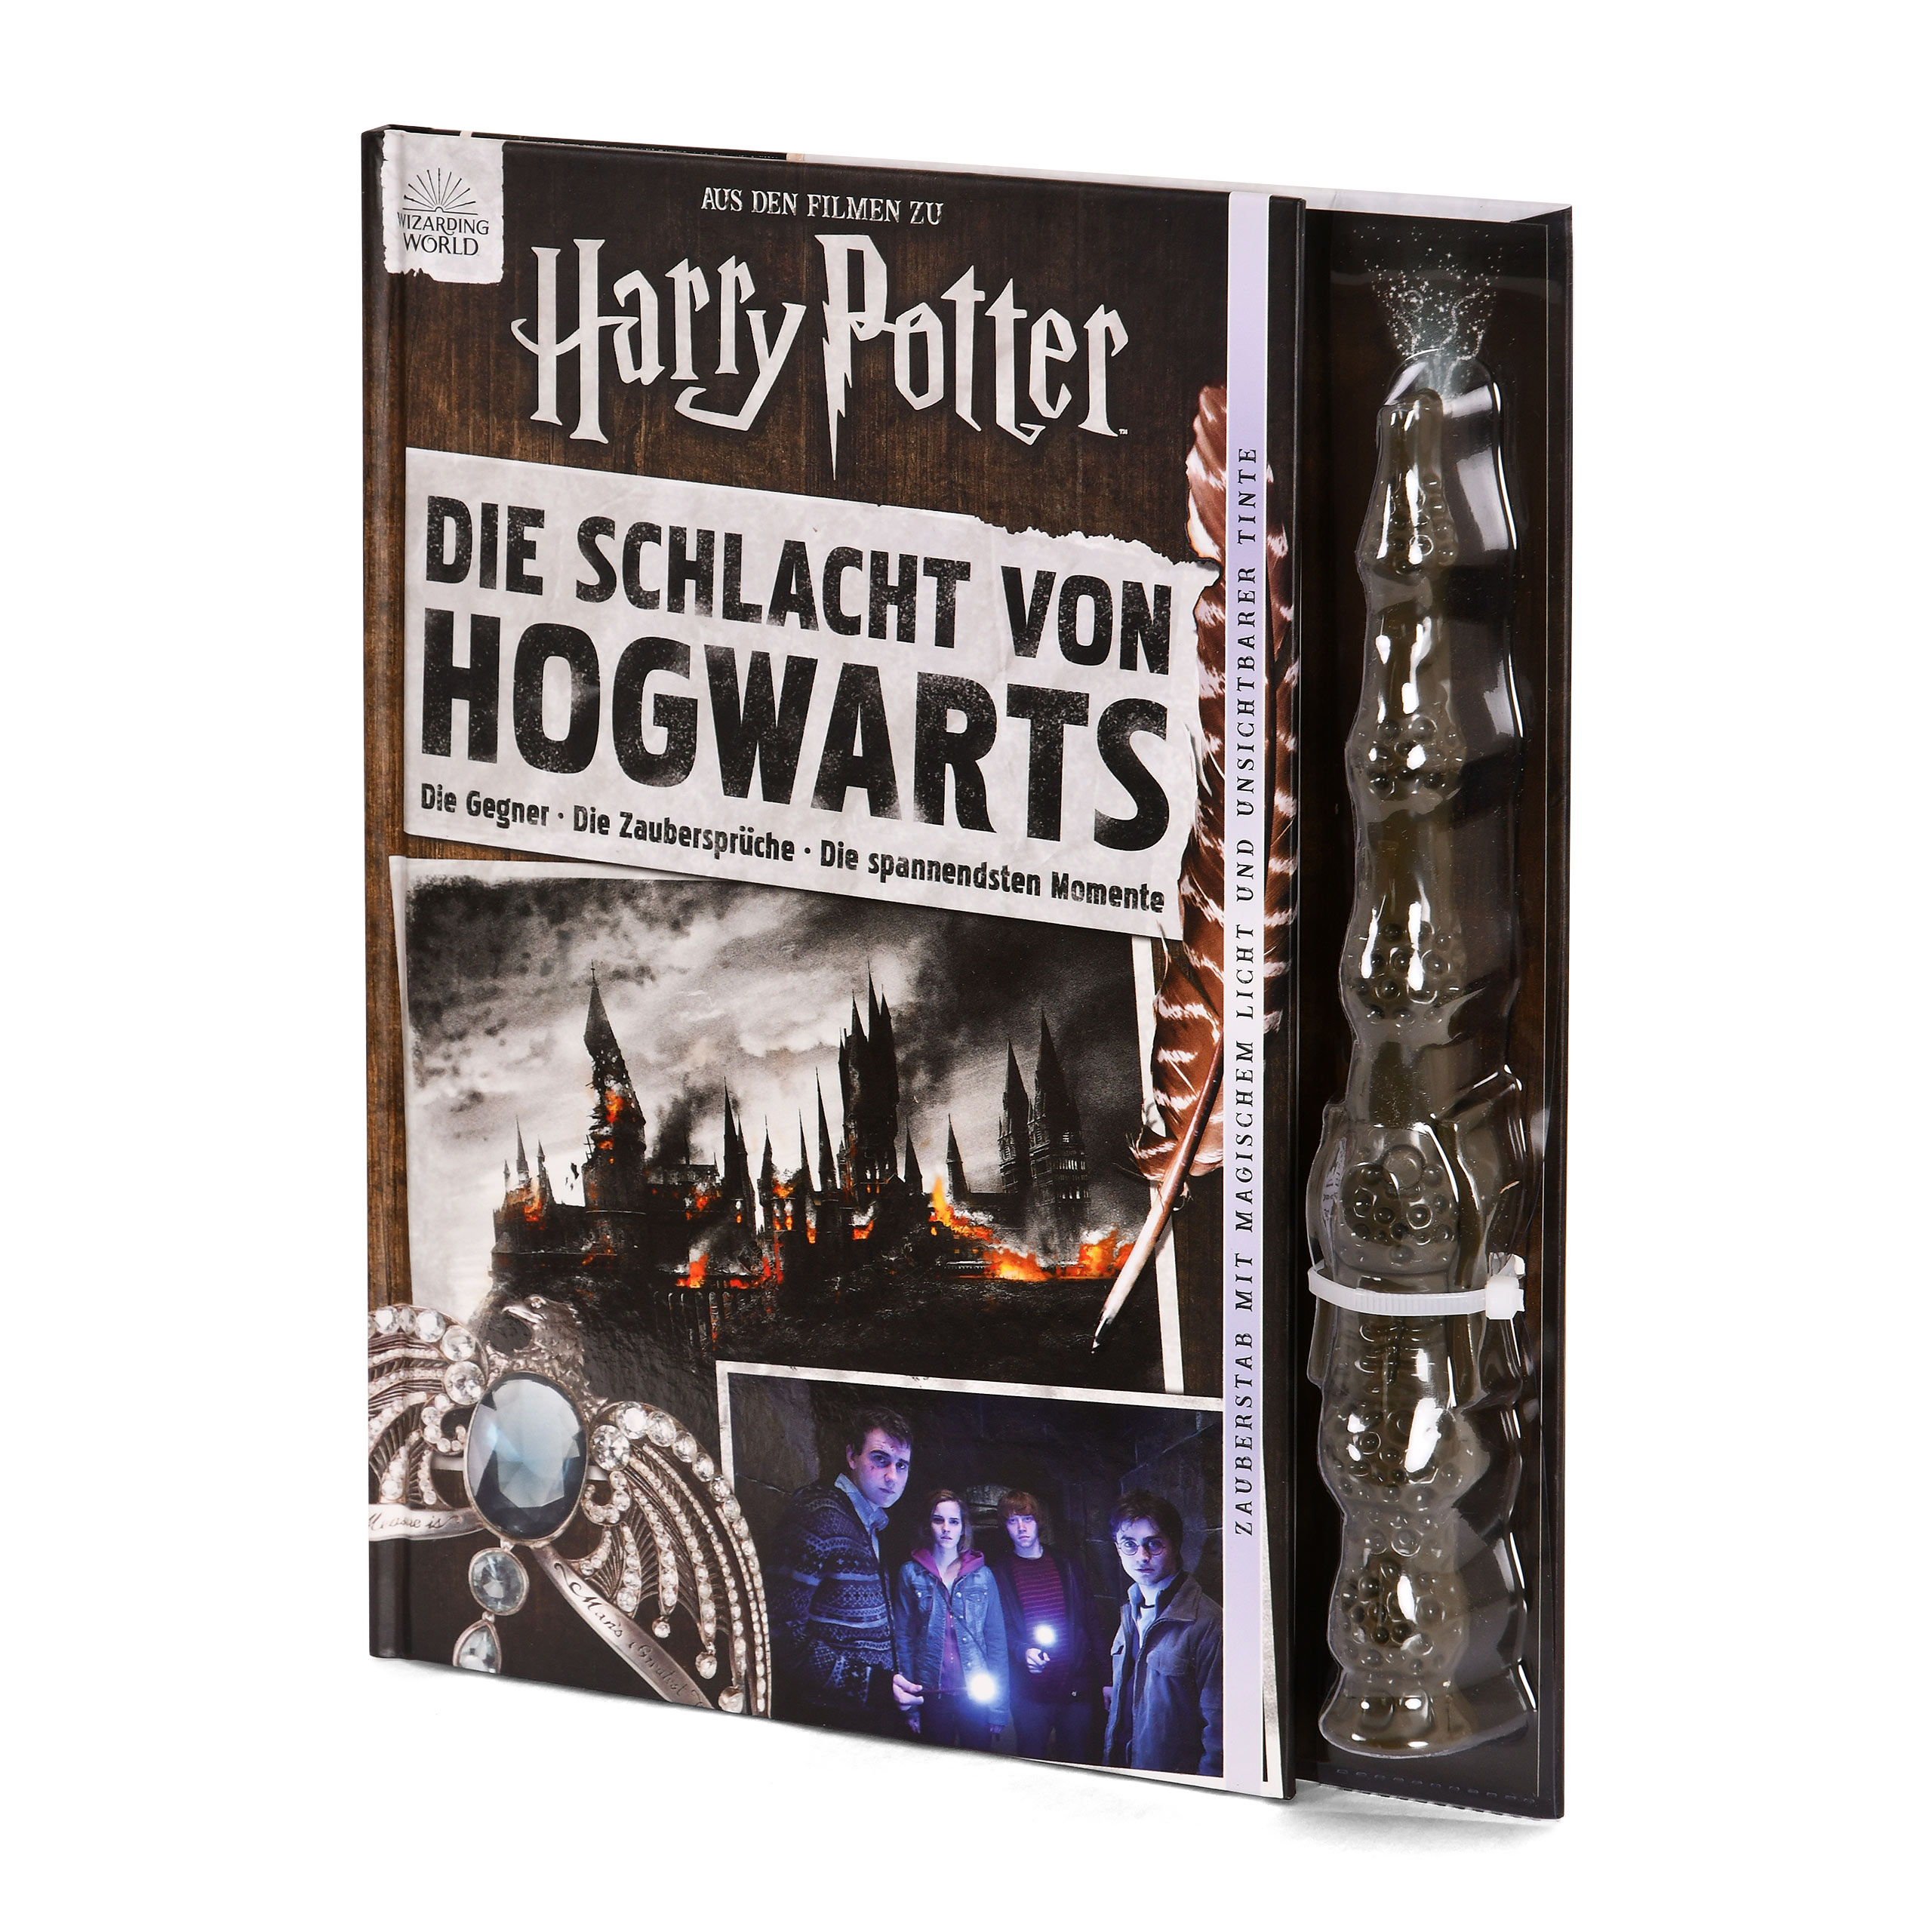 Harry Potter - The Battle of Hogwarts with Magic Wand